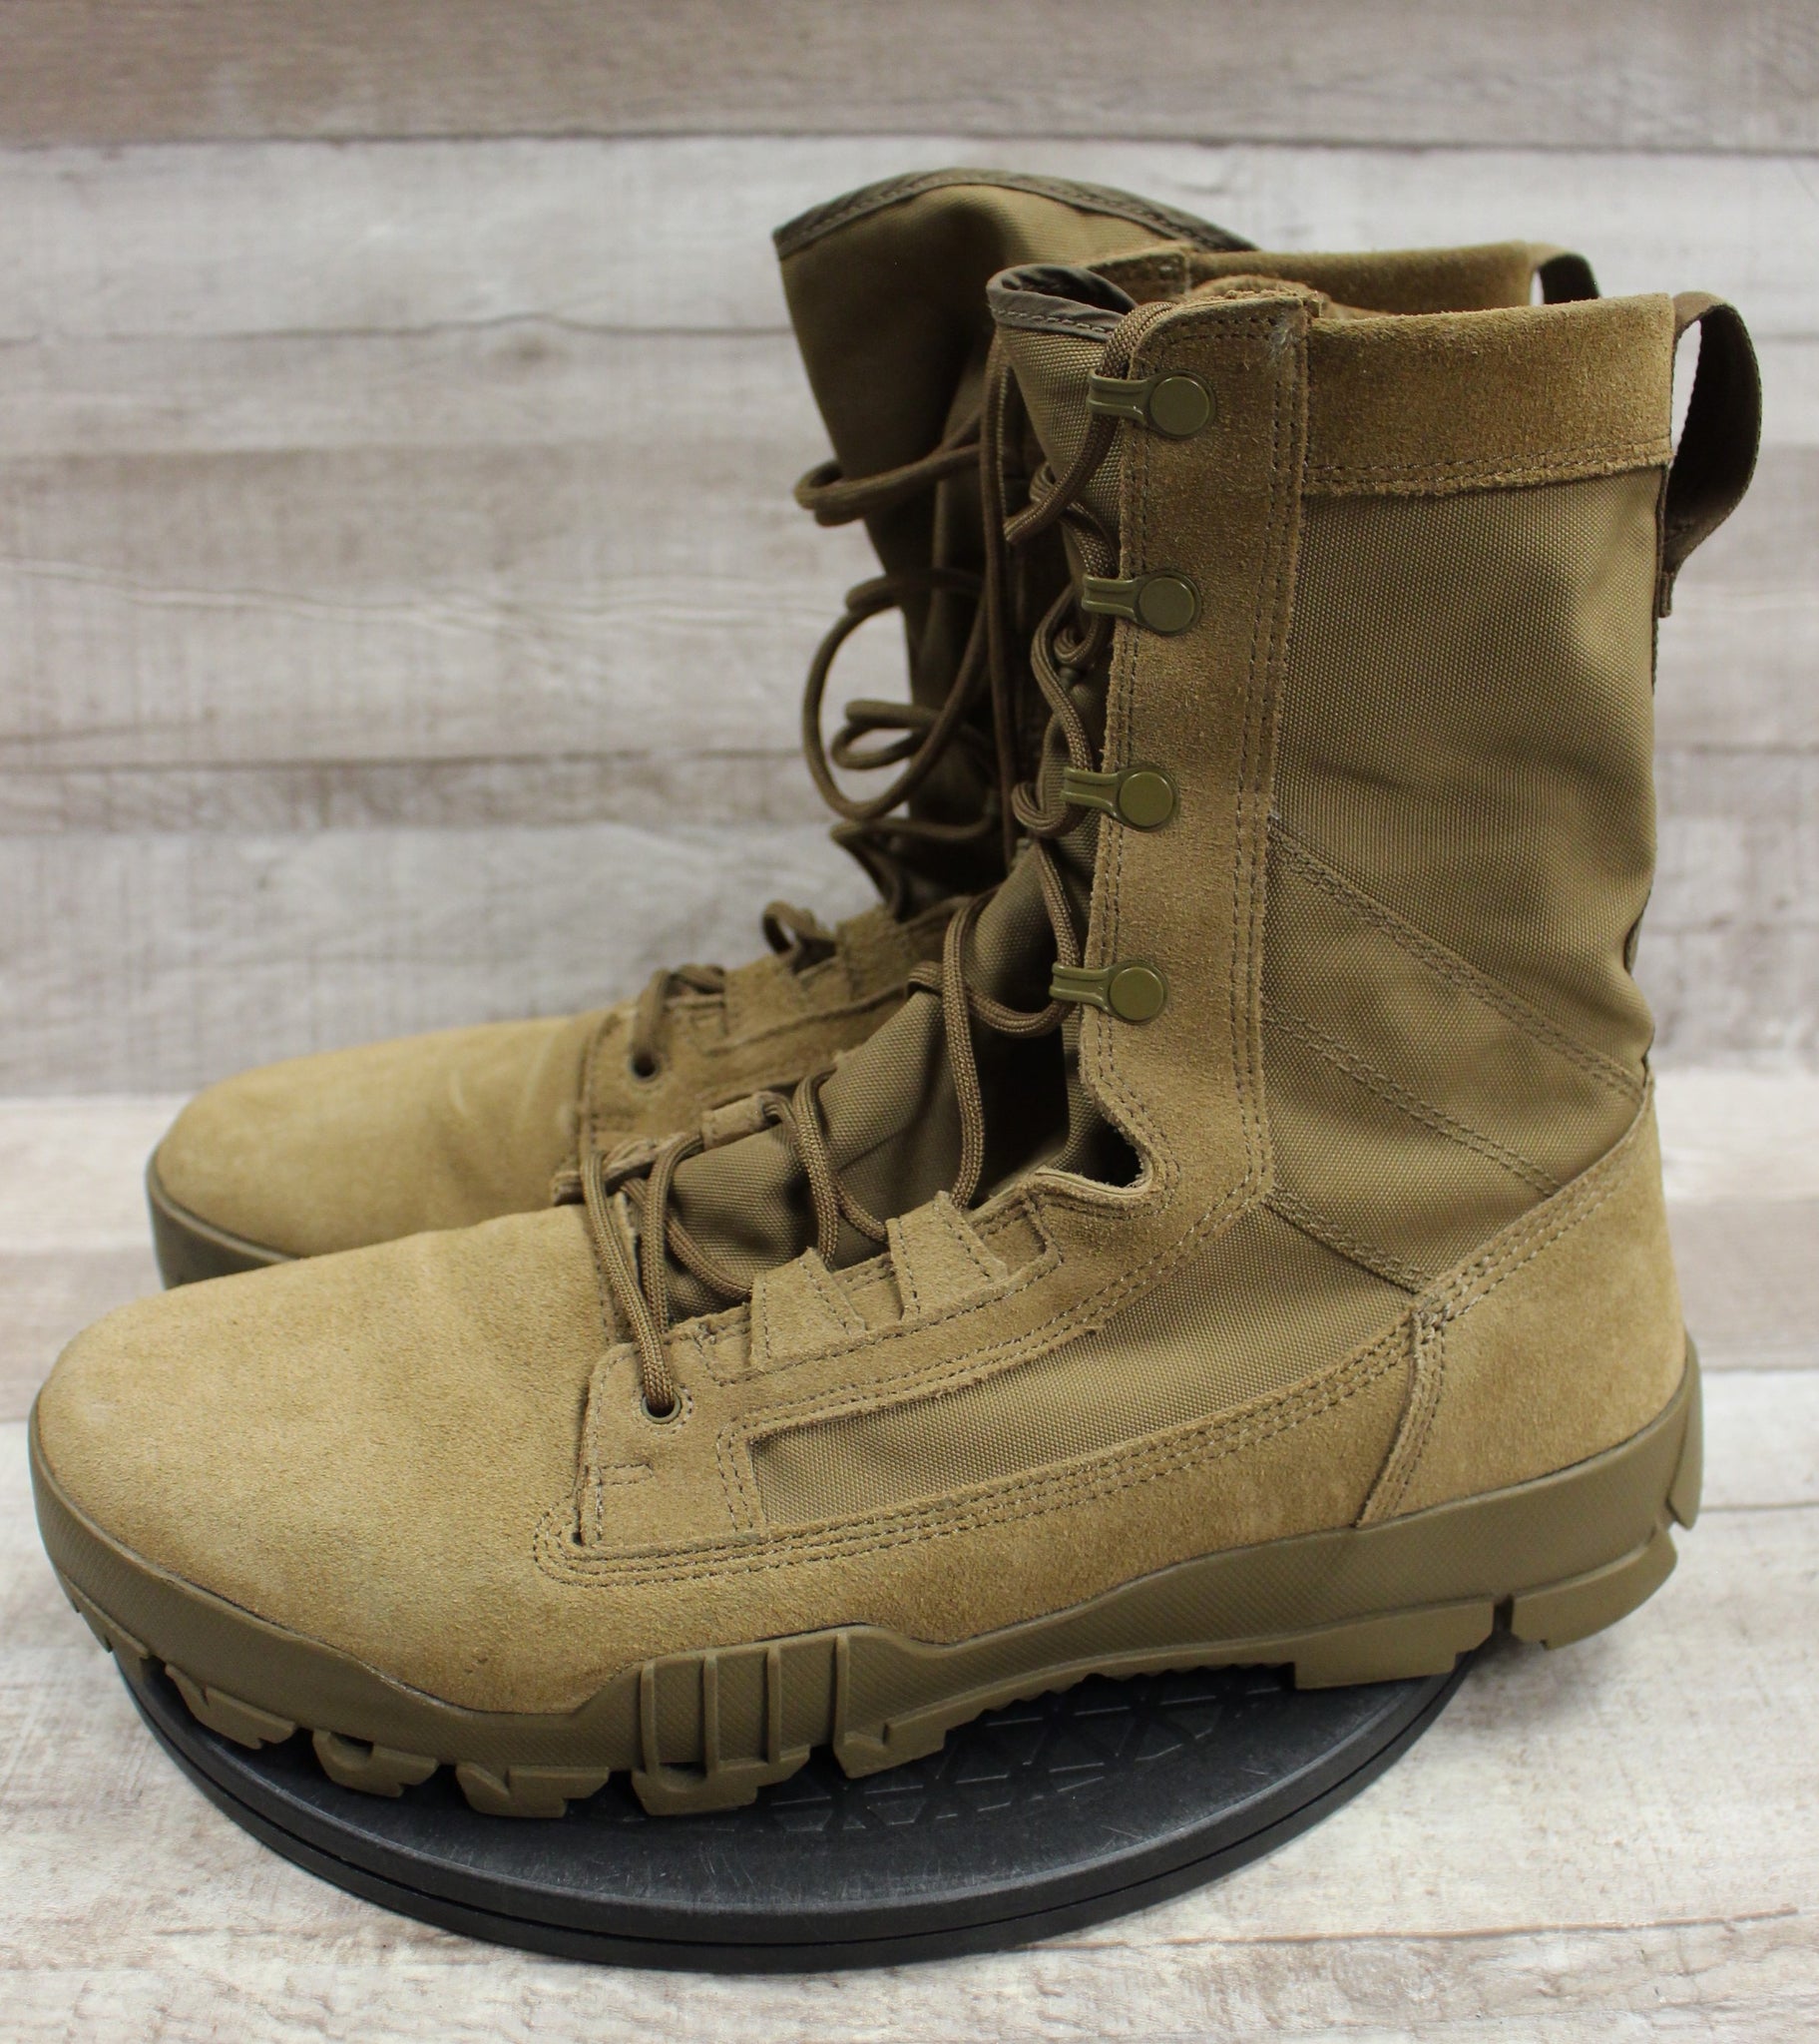 Nike SFB 8" Leather Tactical Boots - Coyote - 11.5 – Steals and Surplus